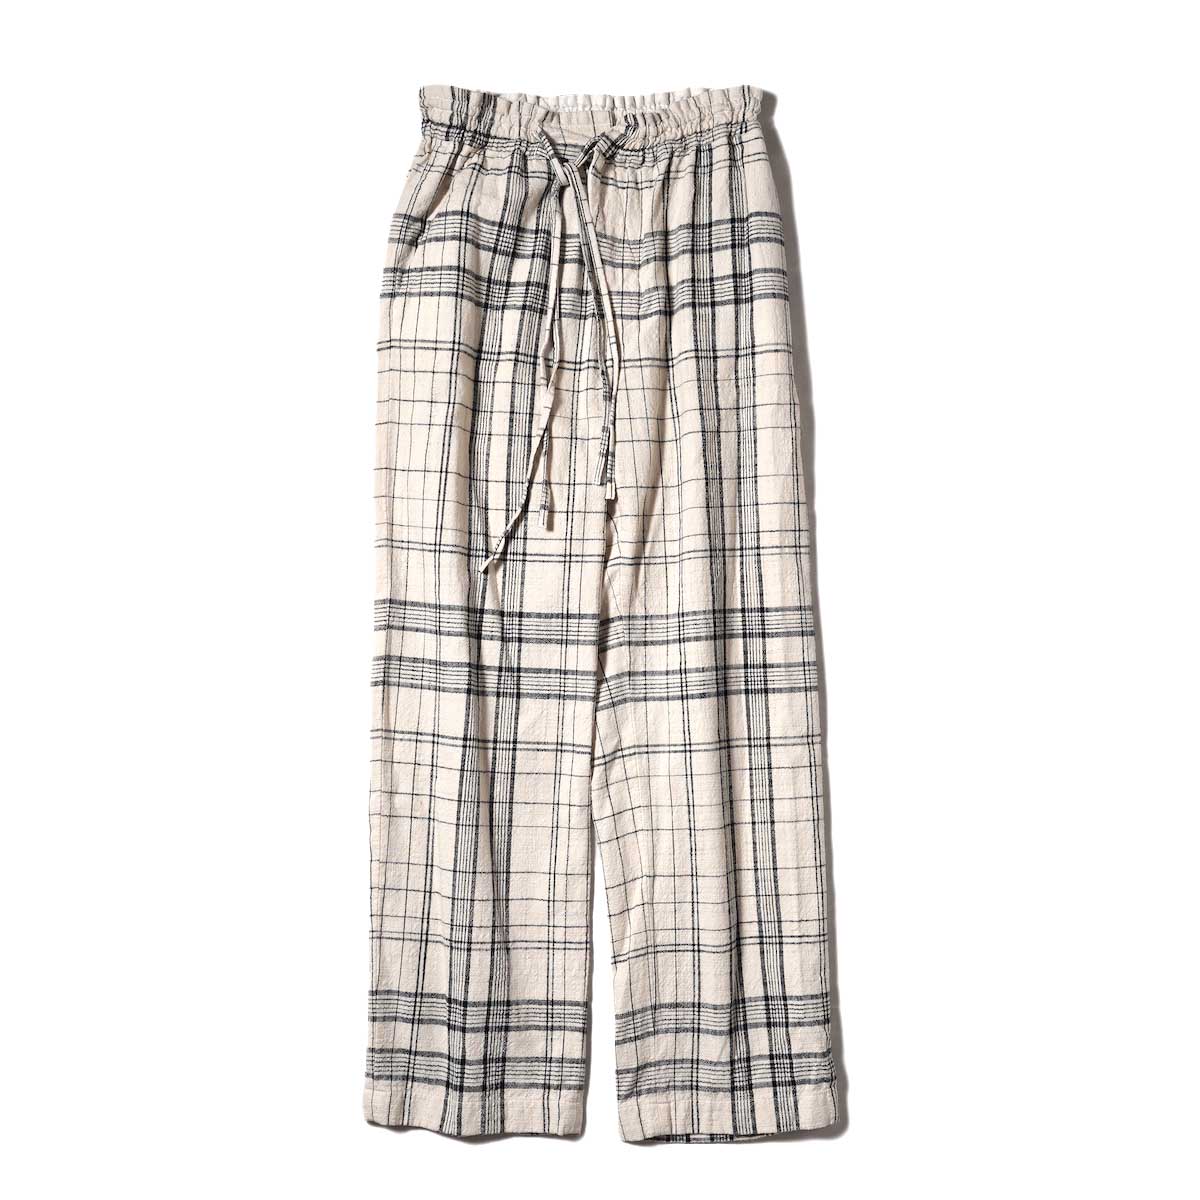 ARCHI / CHECKED RELAX PANTS (Natural)